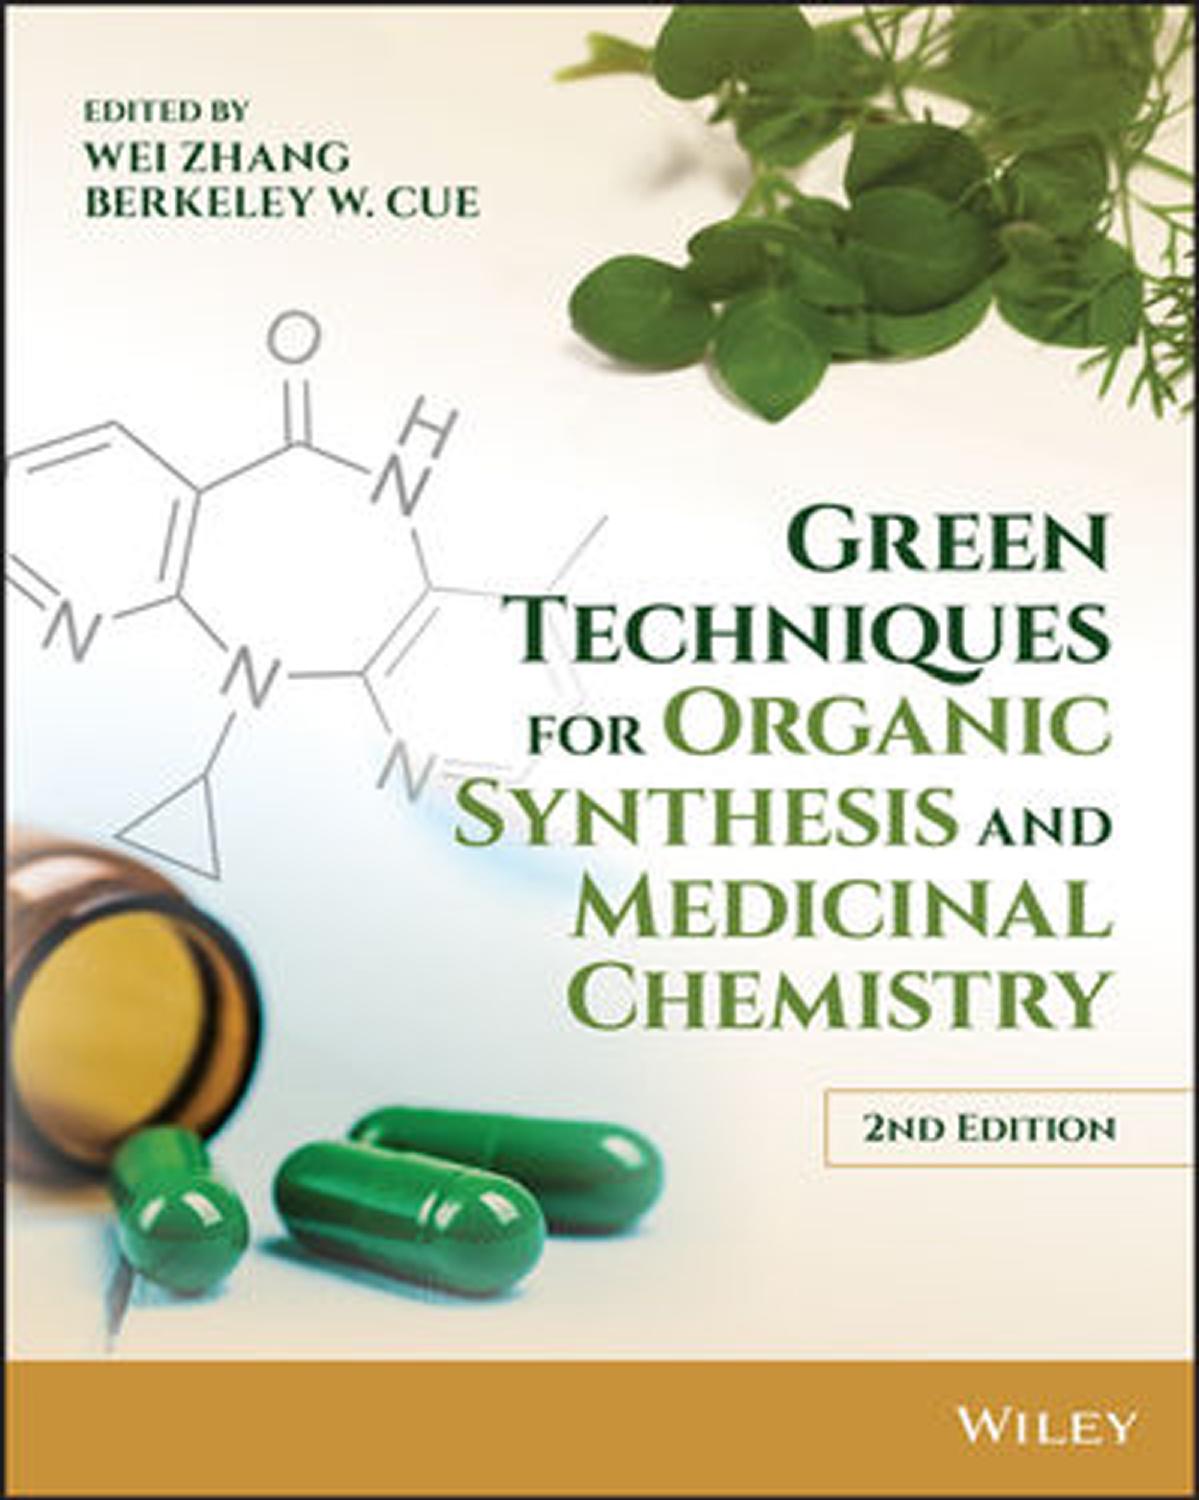 Green Techniques for Organic Synthesis and Medicinal Chemistry, Second Edition